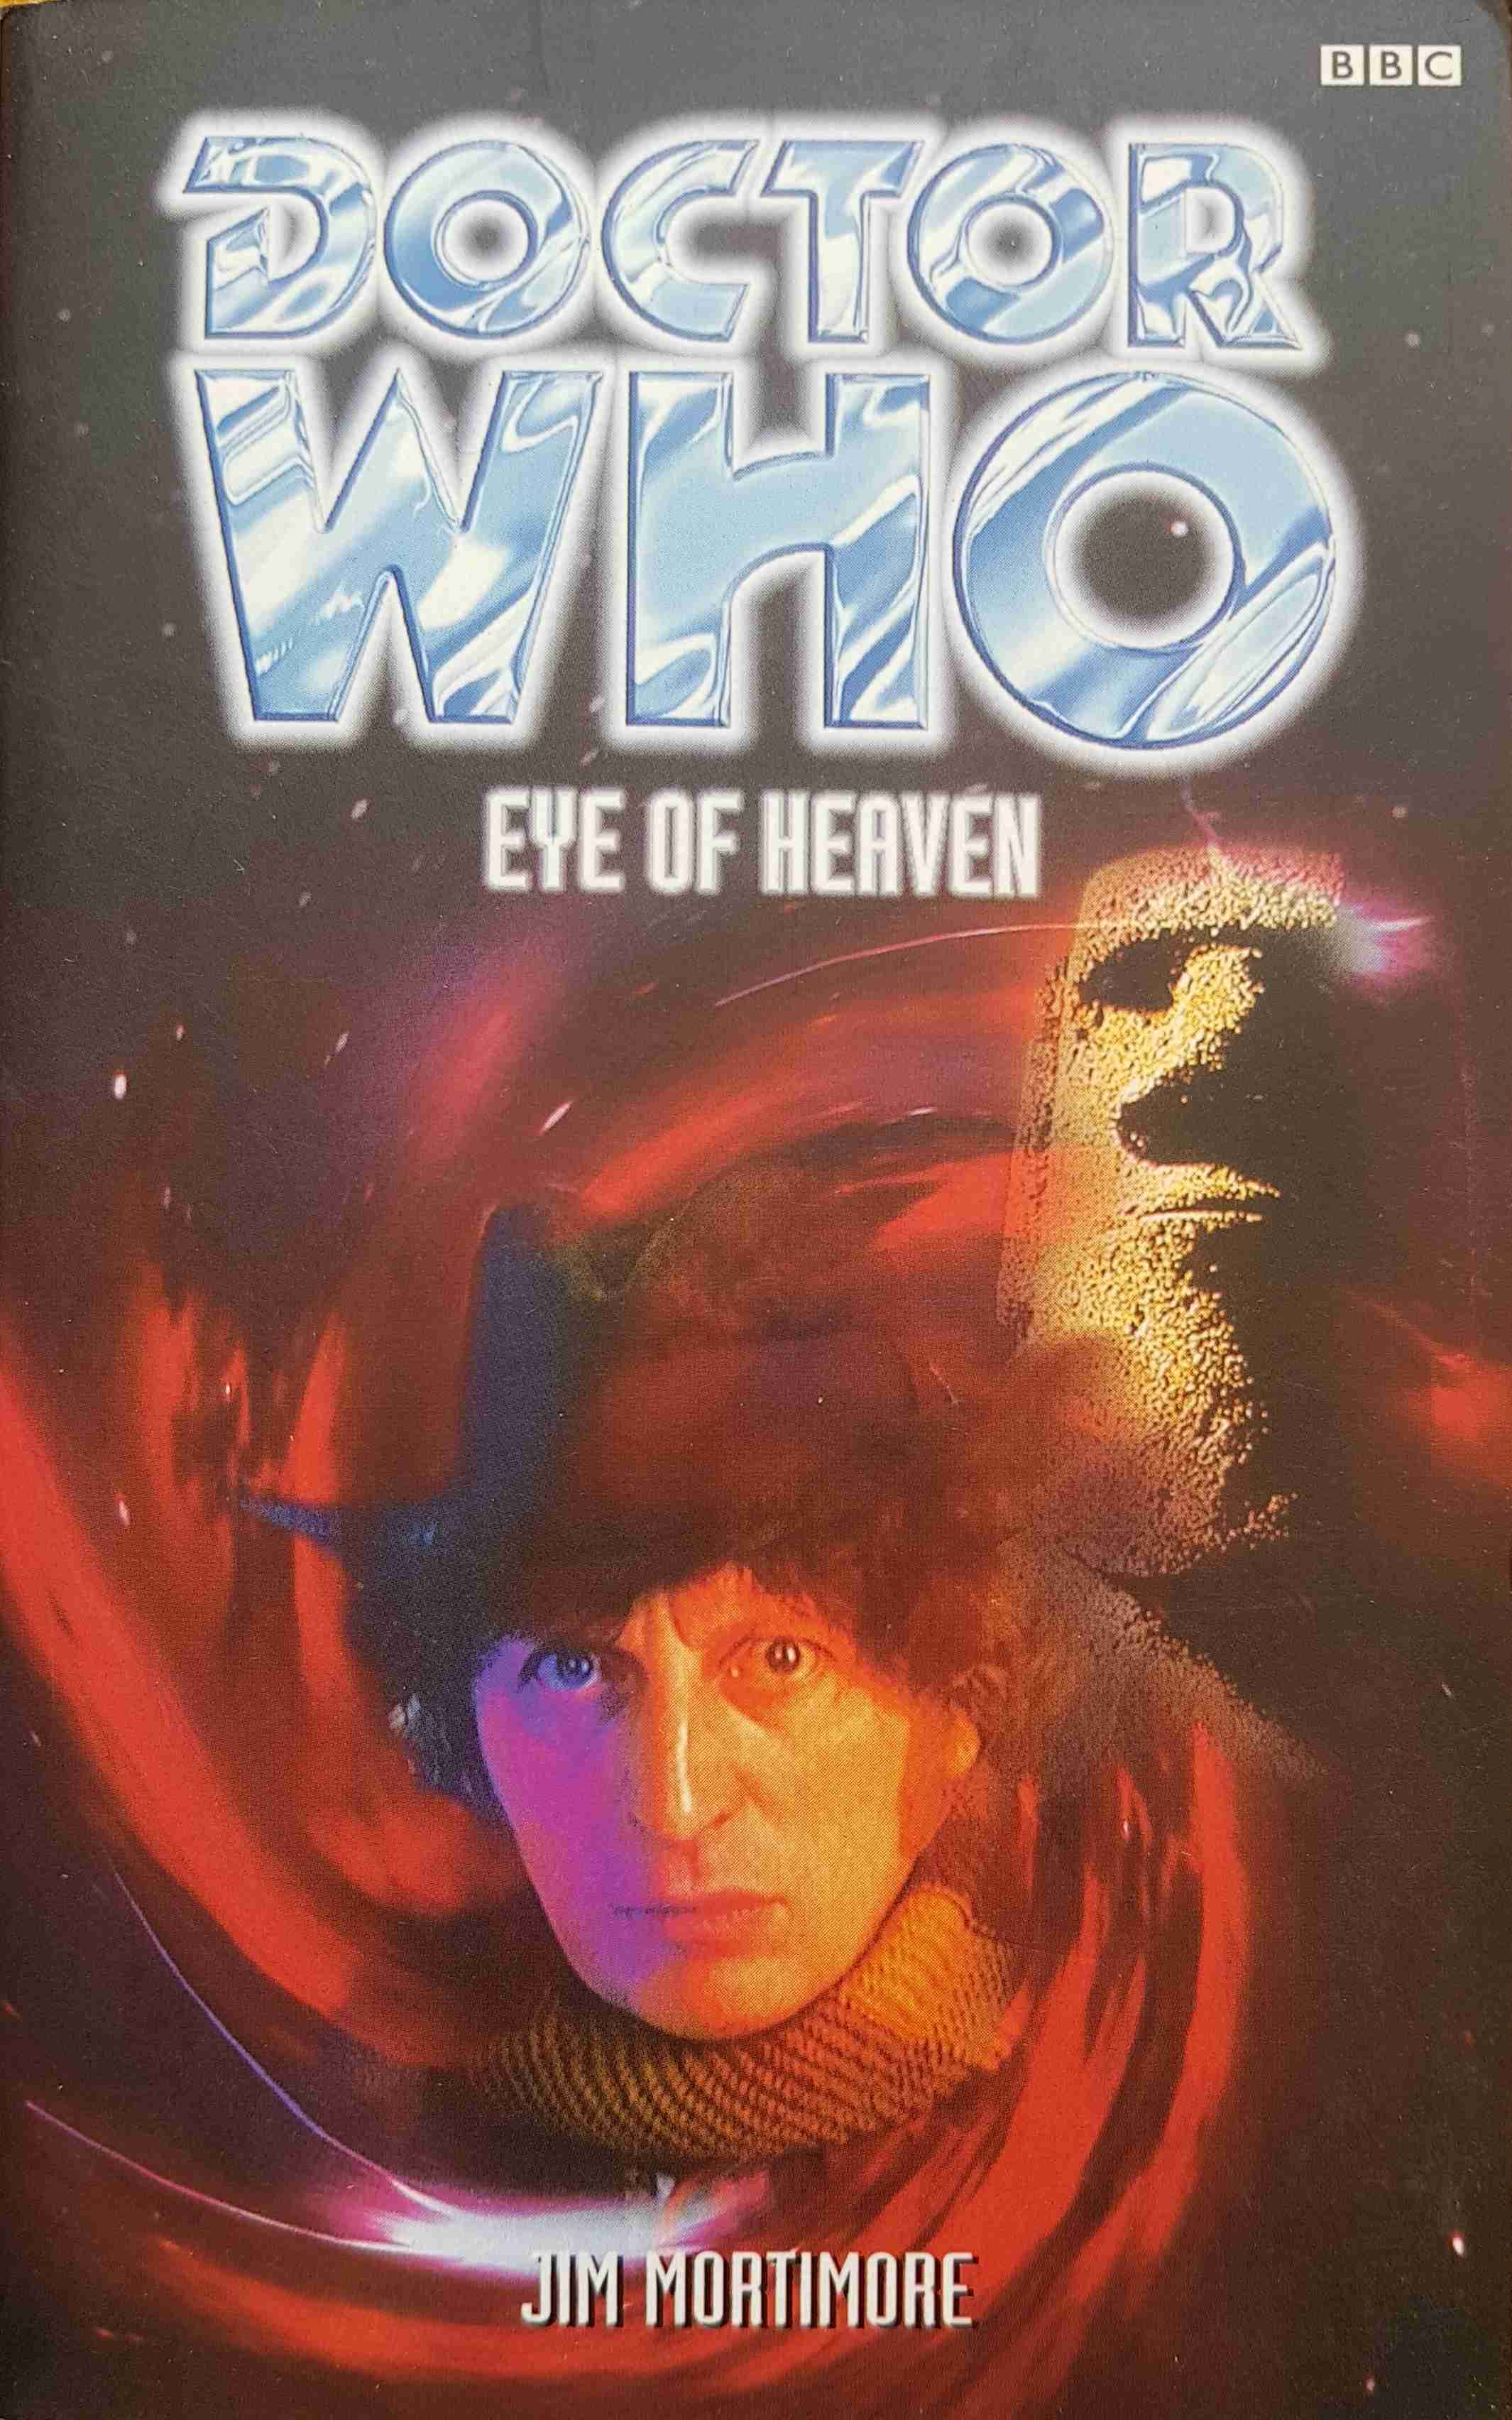 Picture of Doctor Who - Eye of Heaven by artist Jim Mortimore from the BBC books - Records and Tapes library